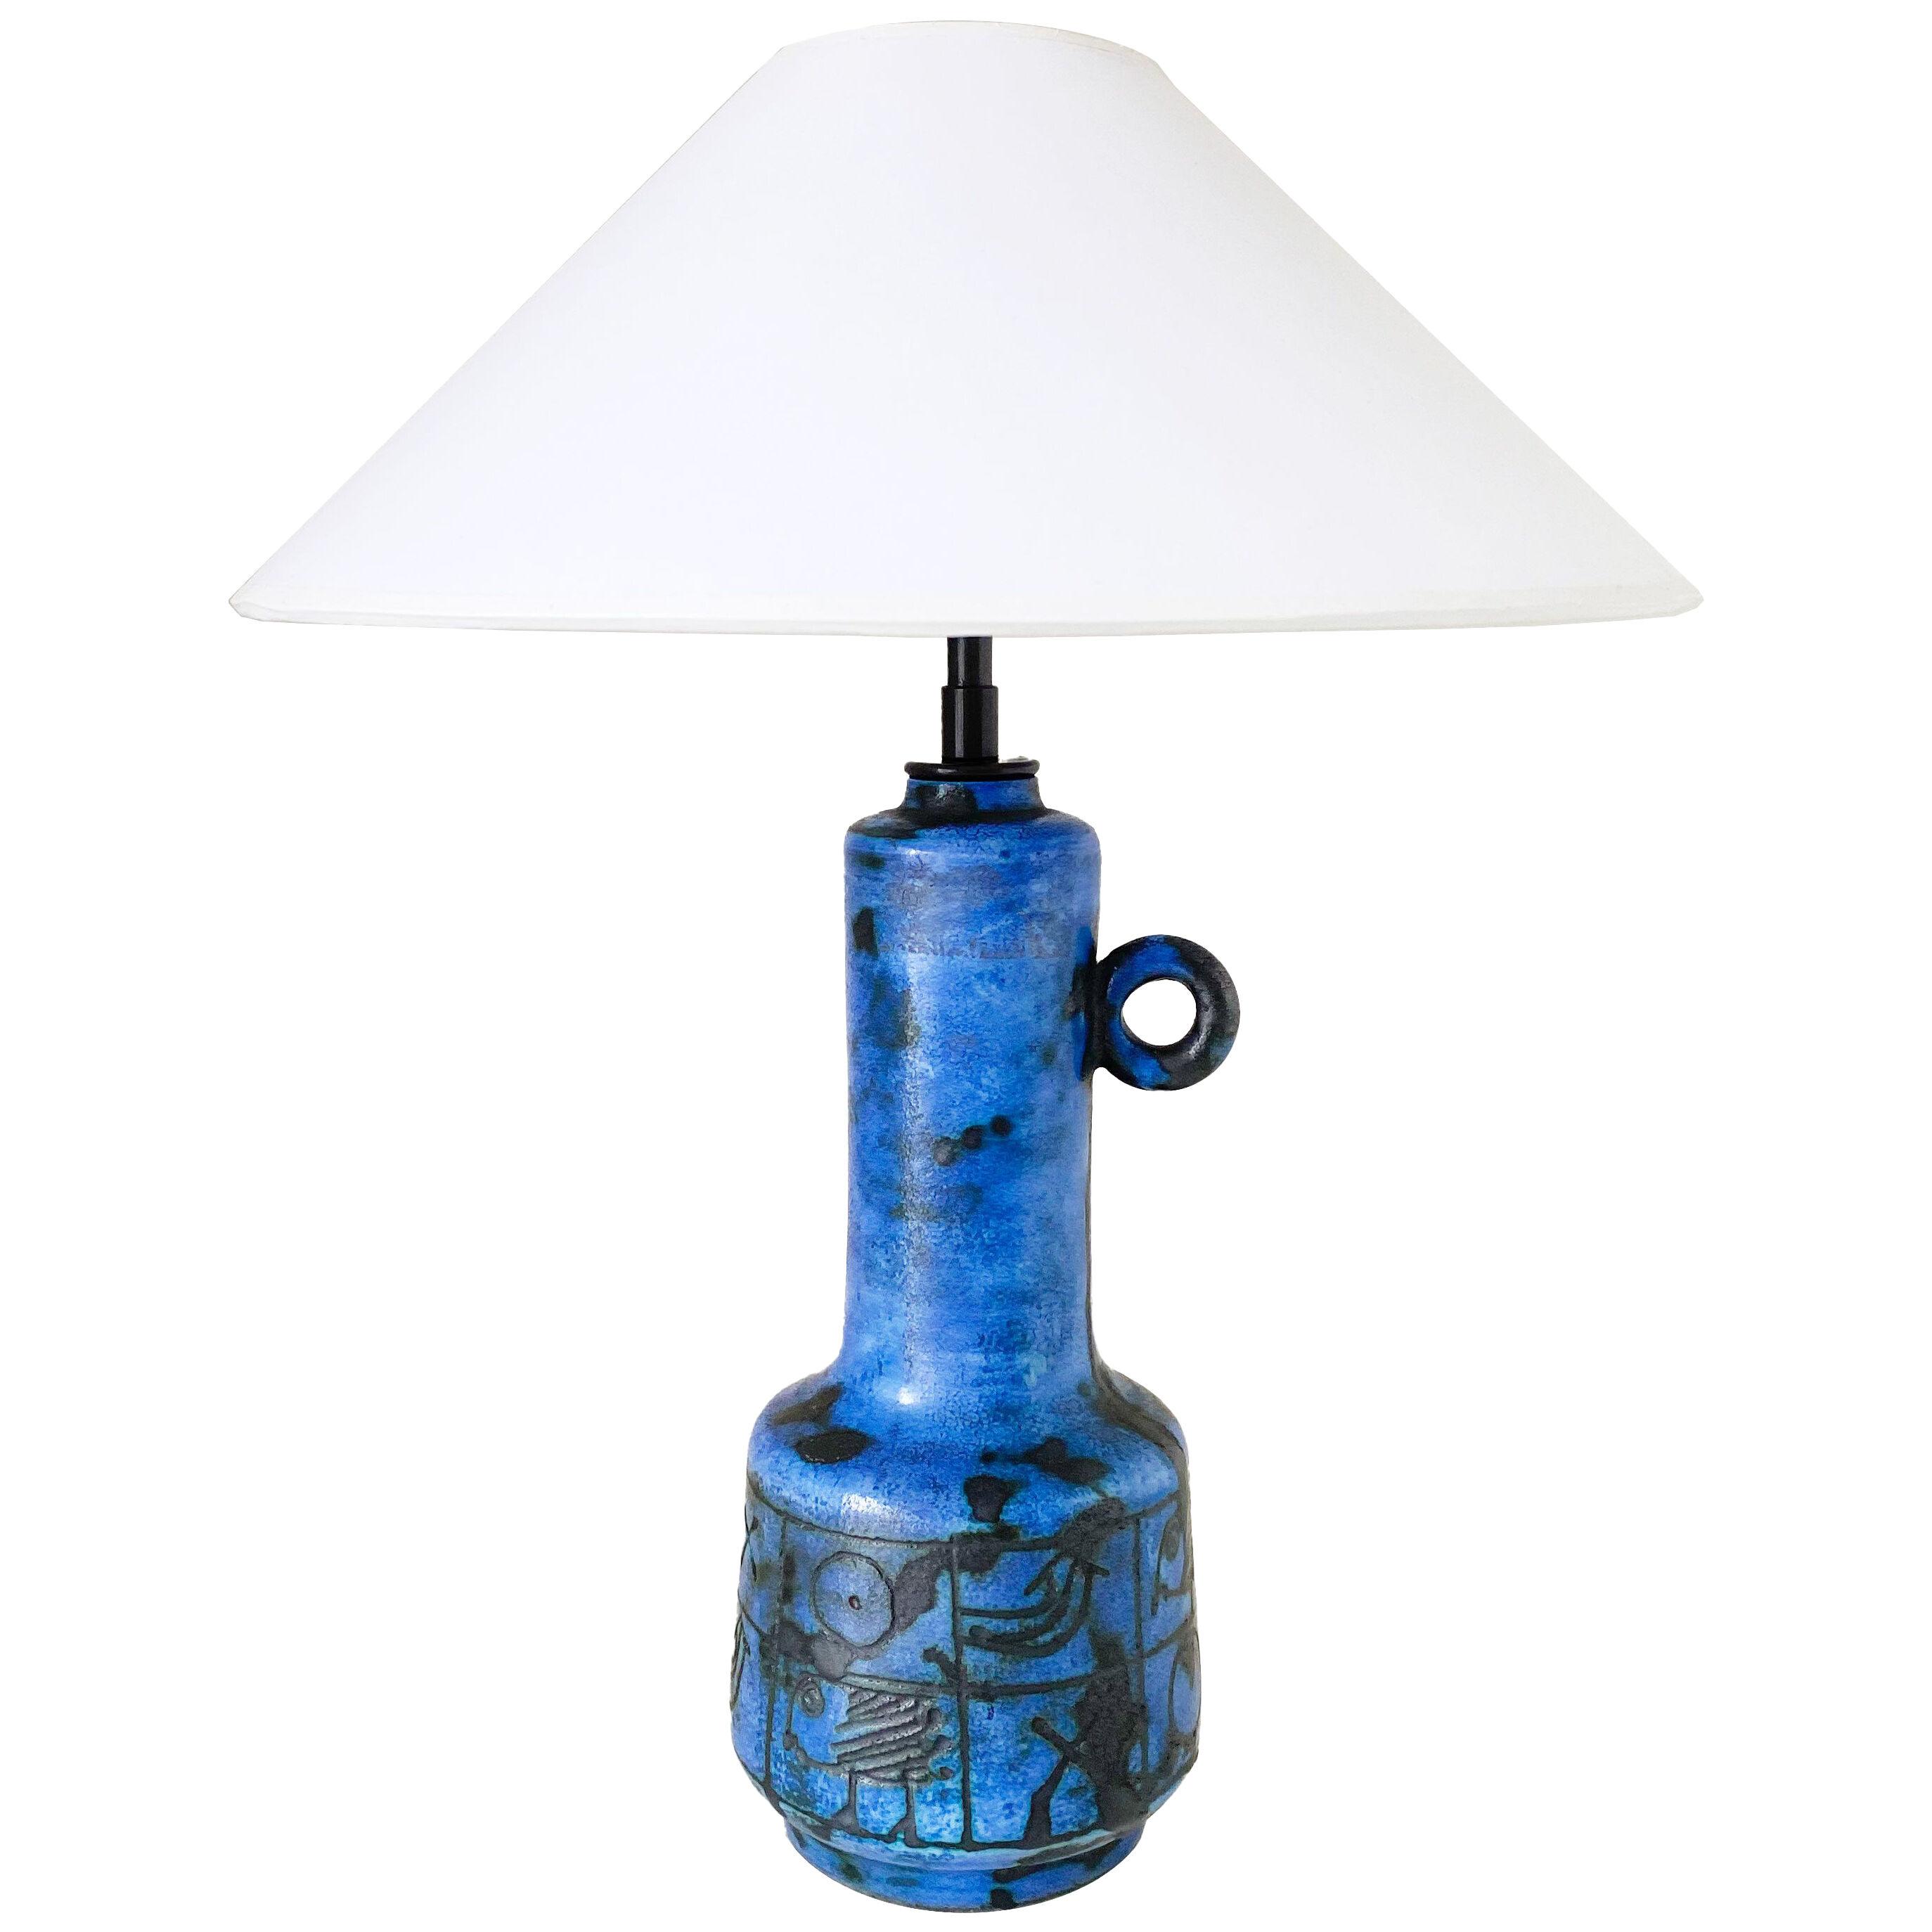 Jacques Blin Small Blue Lamp with Handle